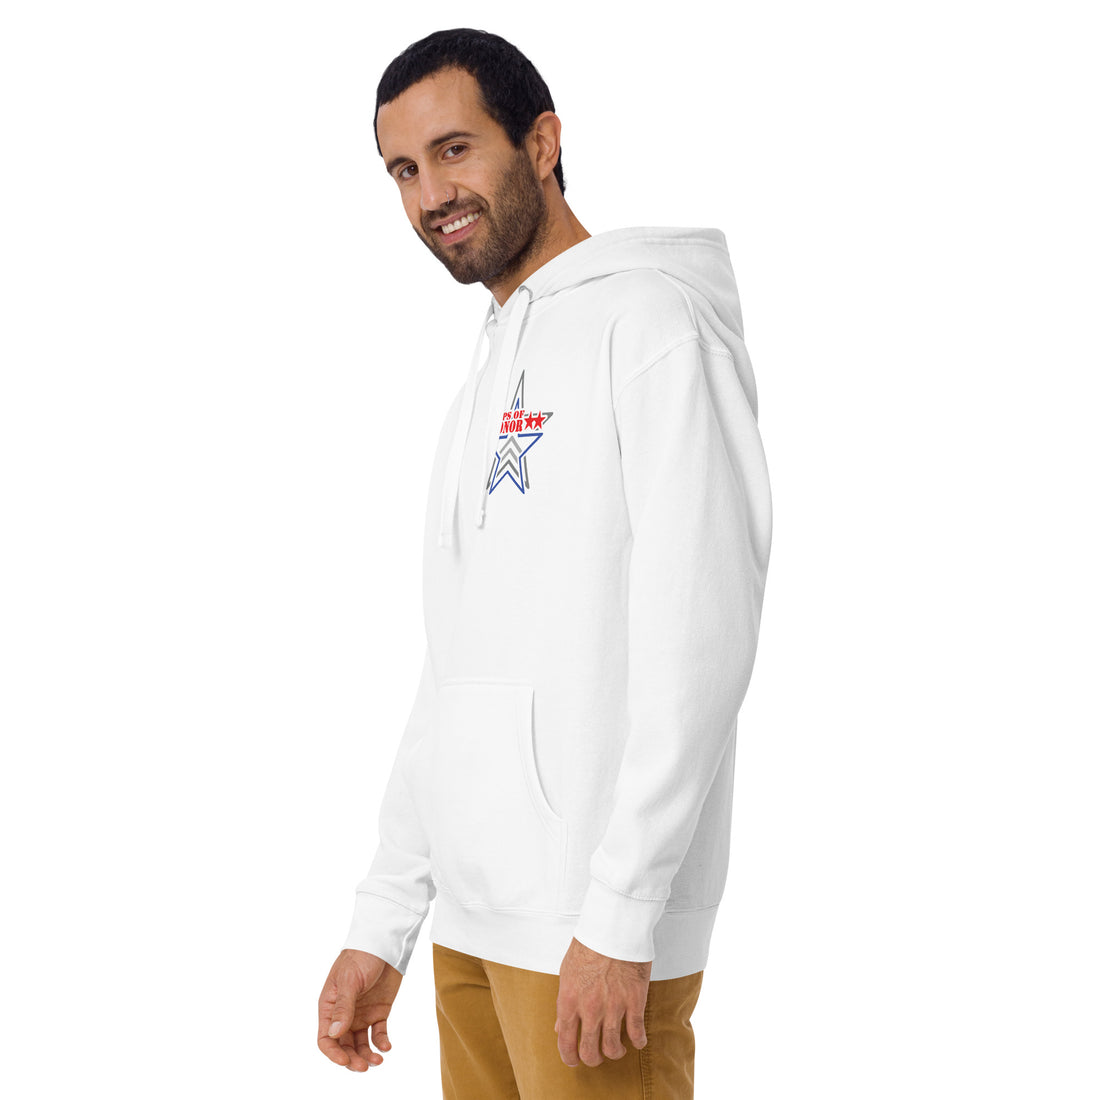 Laps of Honor Unisex Hoodie - Embrace Comfort with a Cause